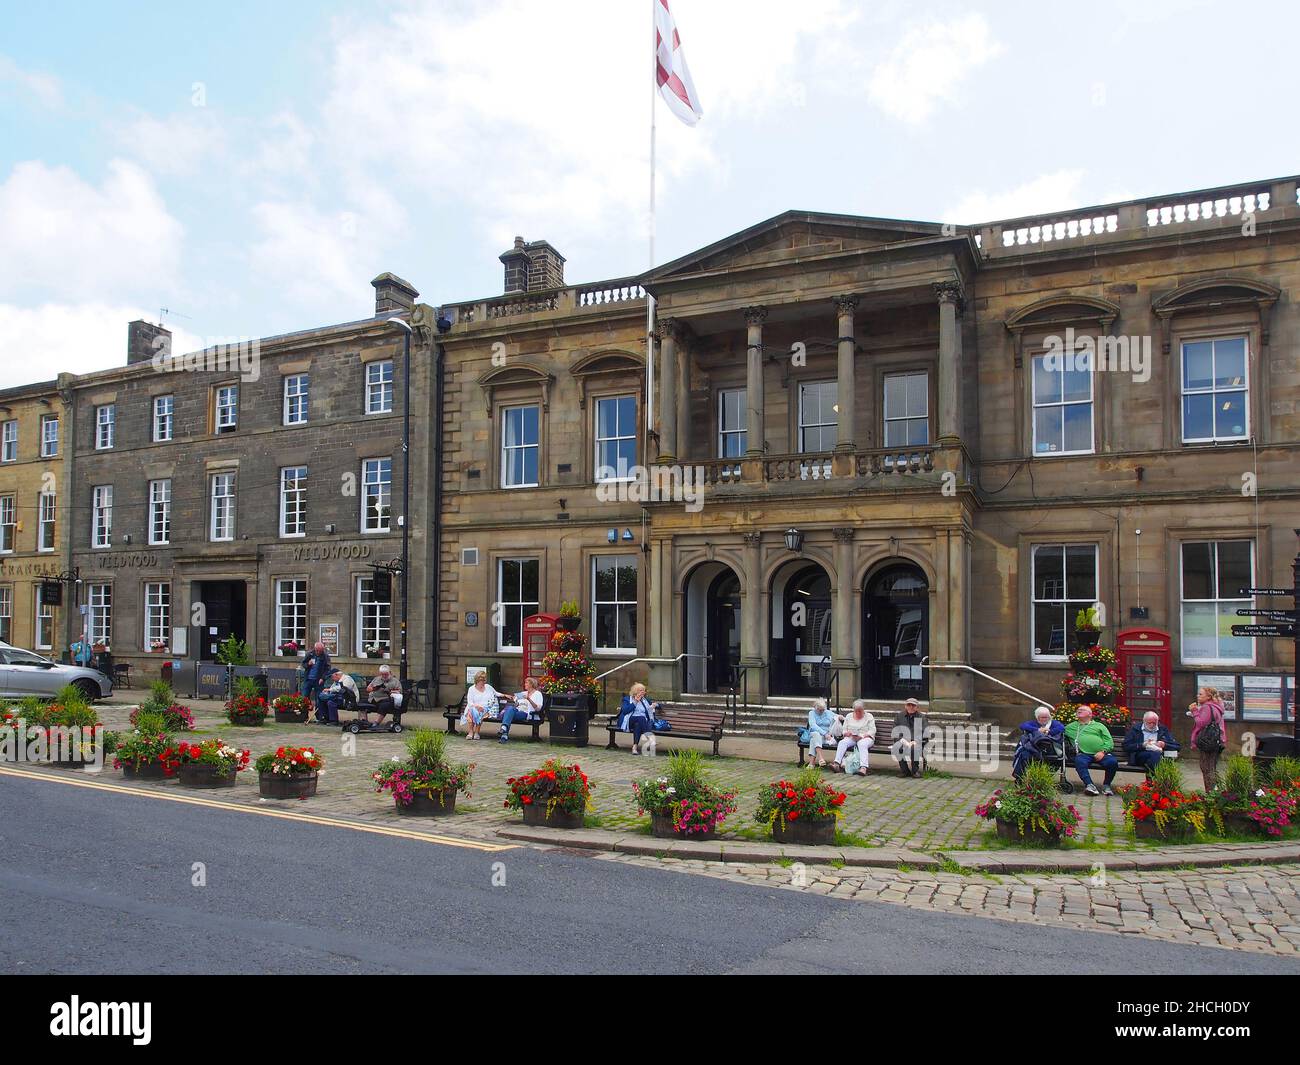 Senior citizens enjoying the sunshine sitting on benches outside Skipton town hall, North Yorkshire, England, with flowers in tubs in the foreground. Stock Photo